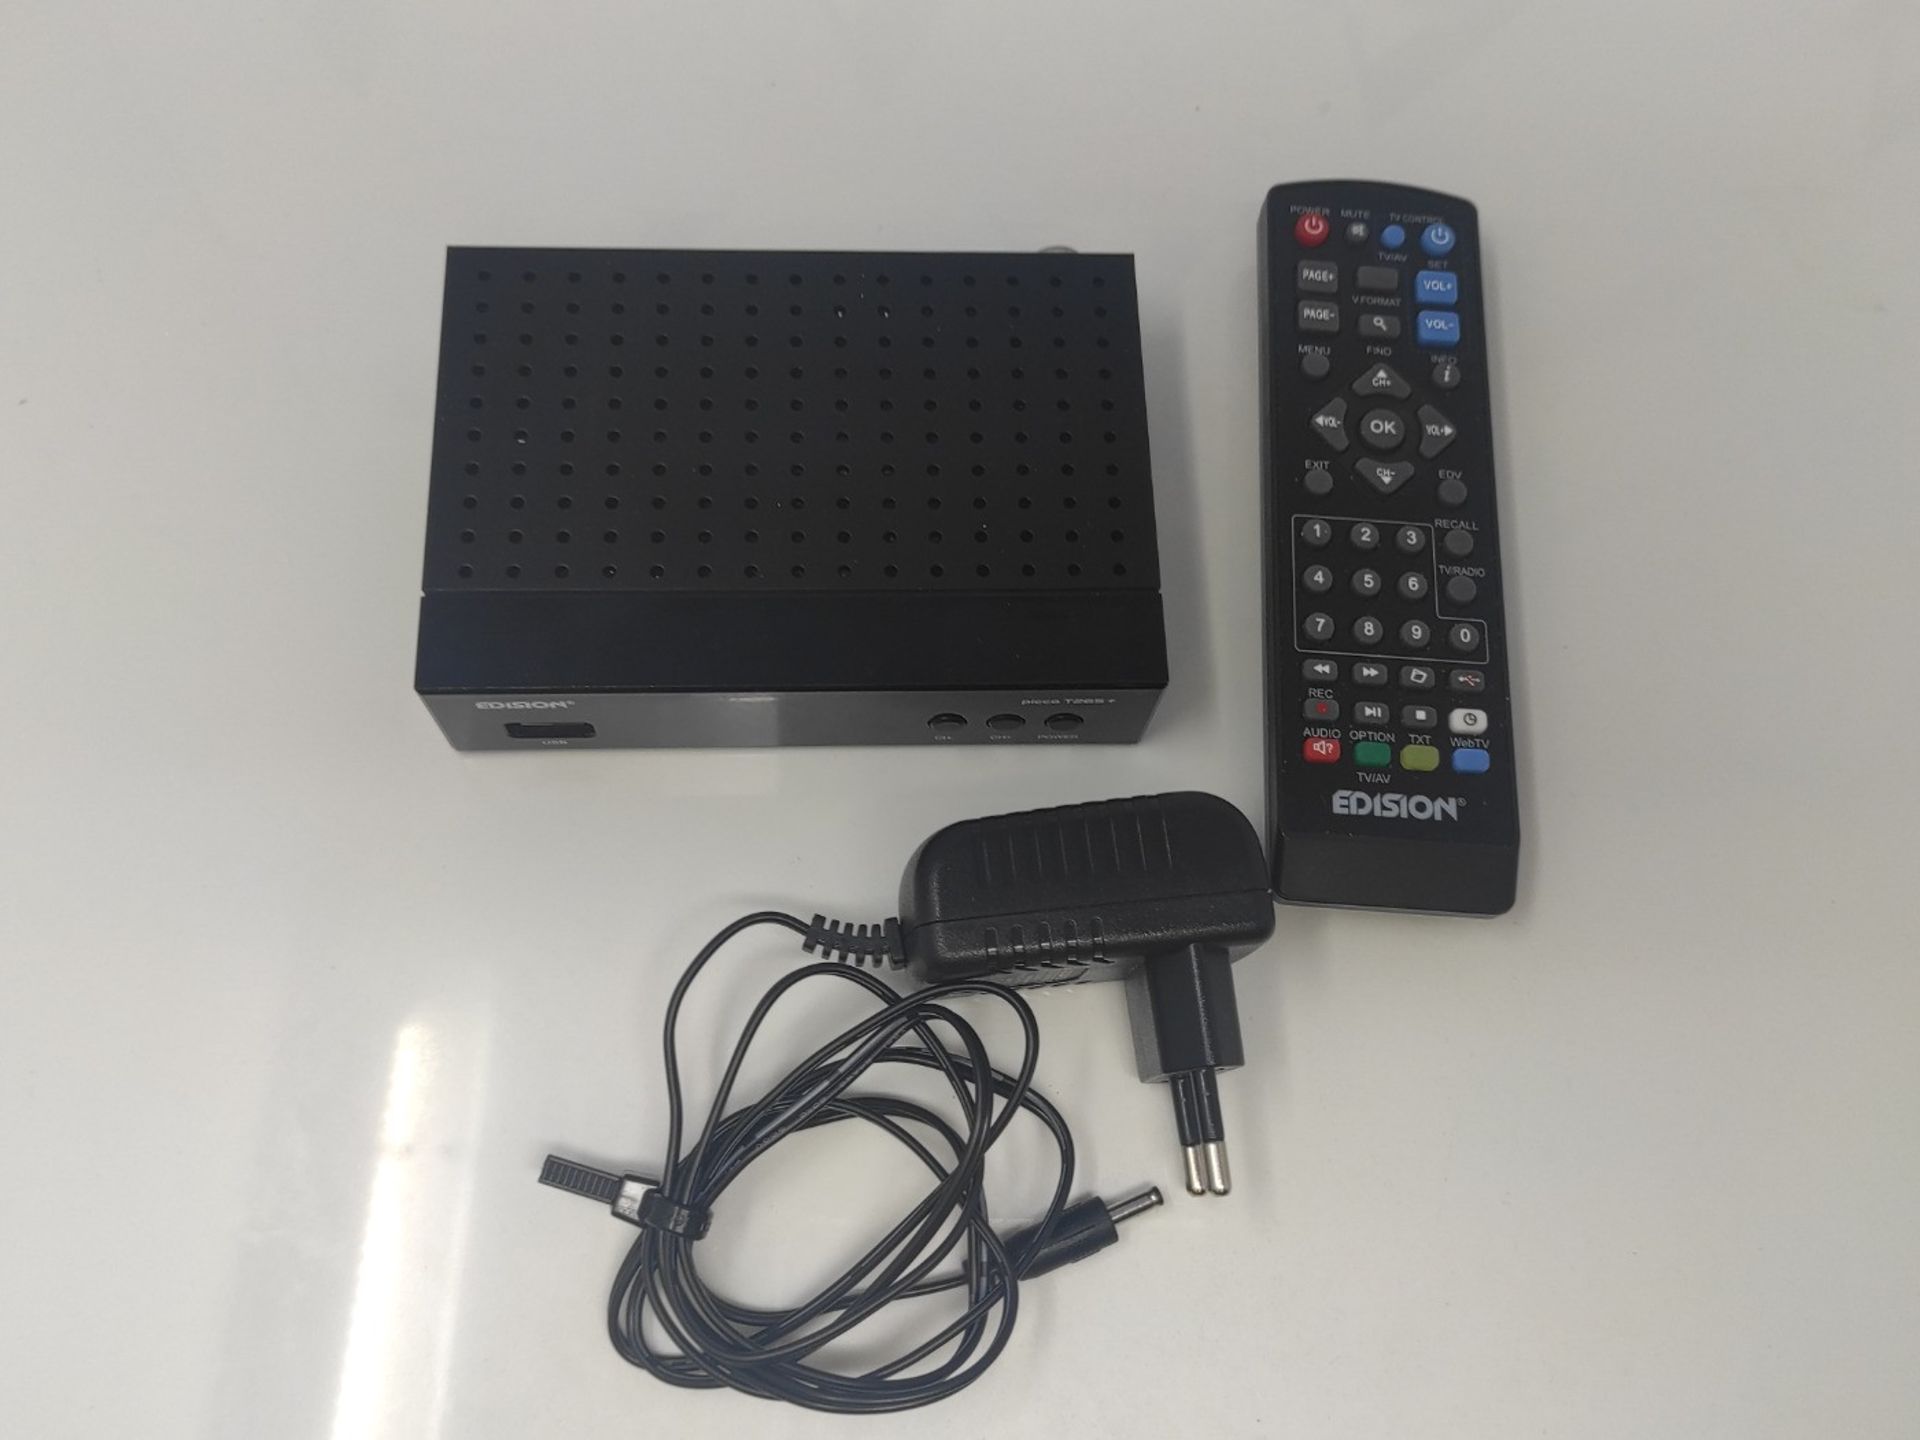 EDISION PICCO T265 pro Terrestrial & Cable Receiver DVB-T2/C H265 HEVC FTA Full HD, PV - Image 3 of 3